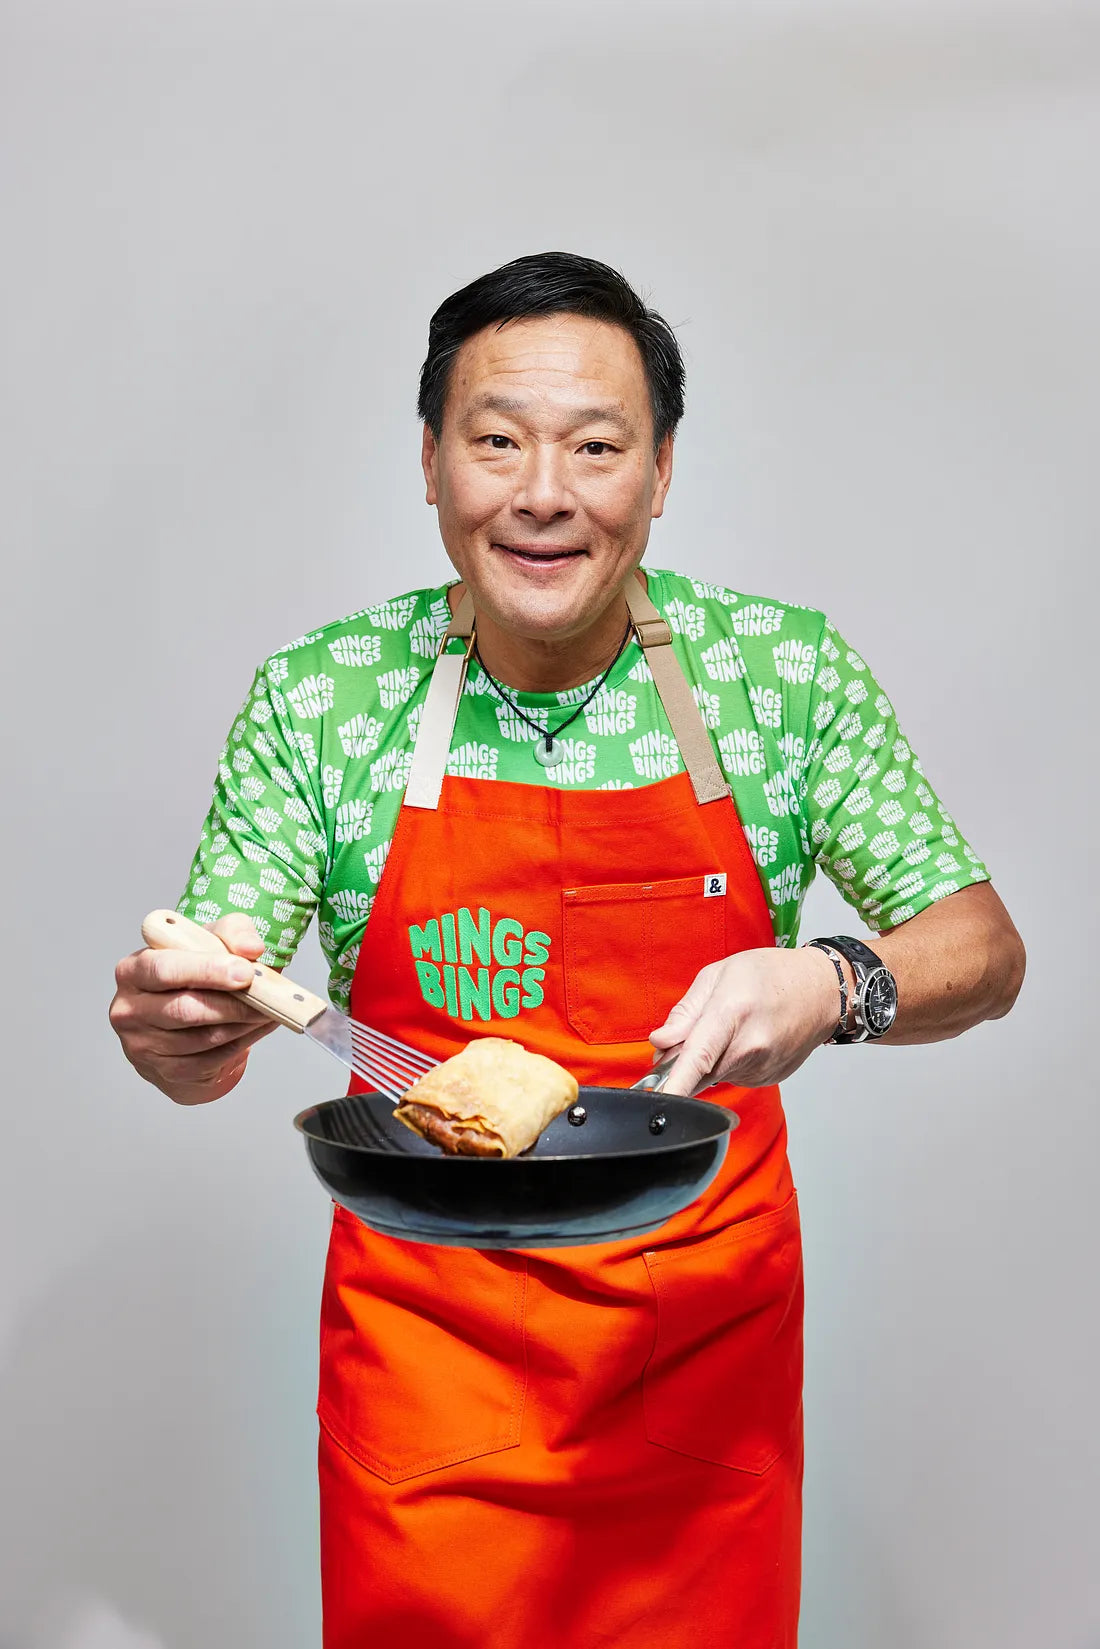 Plant-Powered Prosperity: Iron Chef Ming Tsai Of MingsBings On 5 Things You Need To Create A Successful Plant-Based Product Business